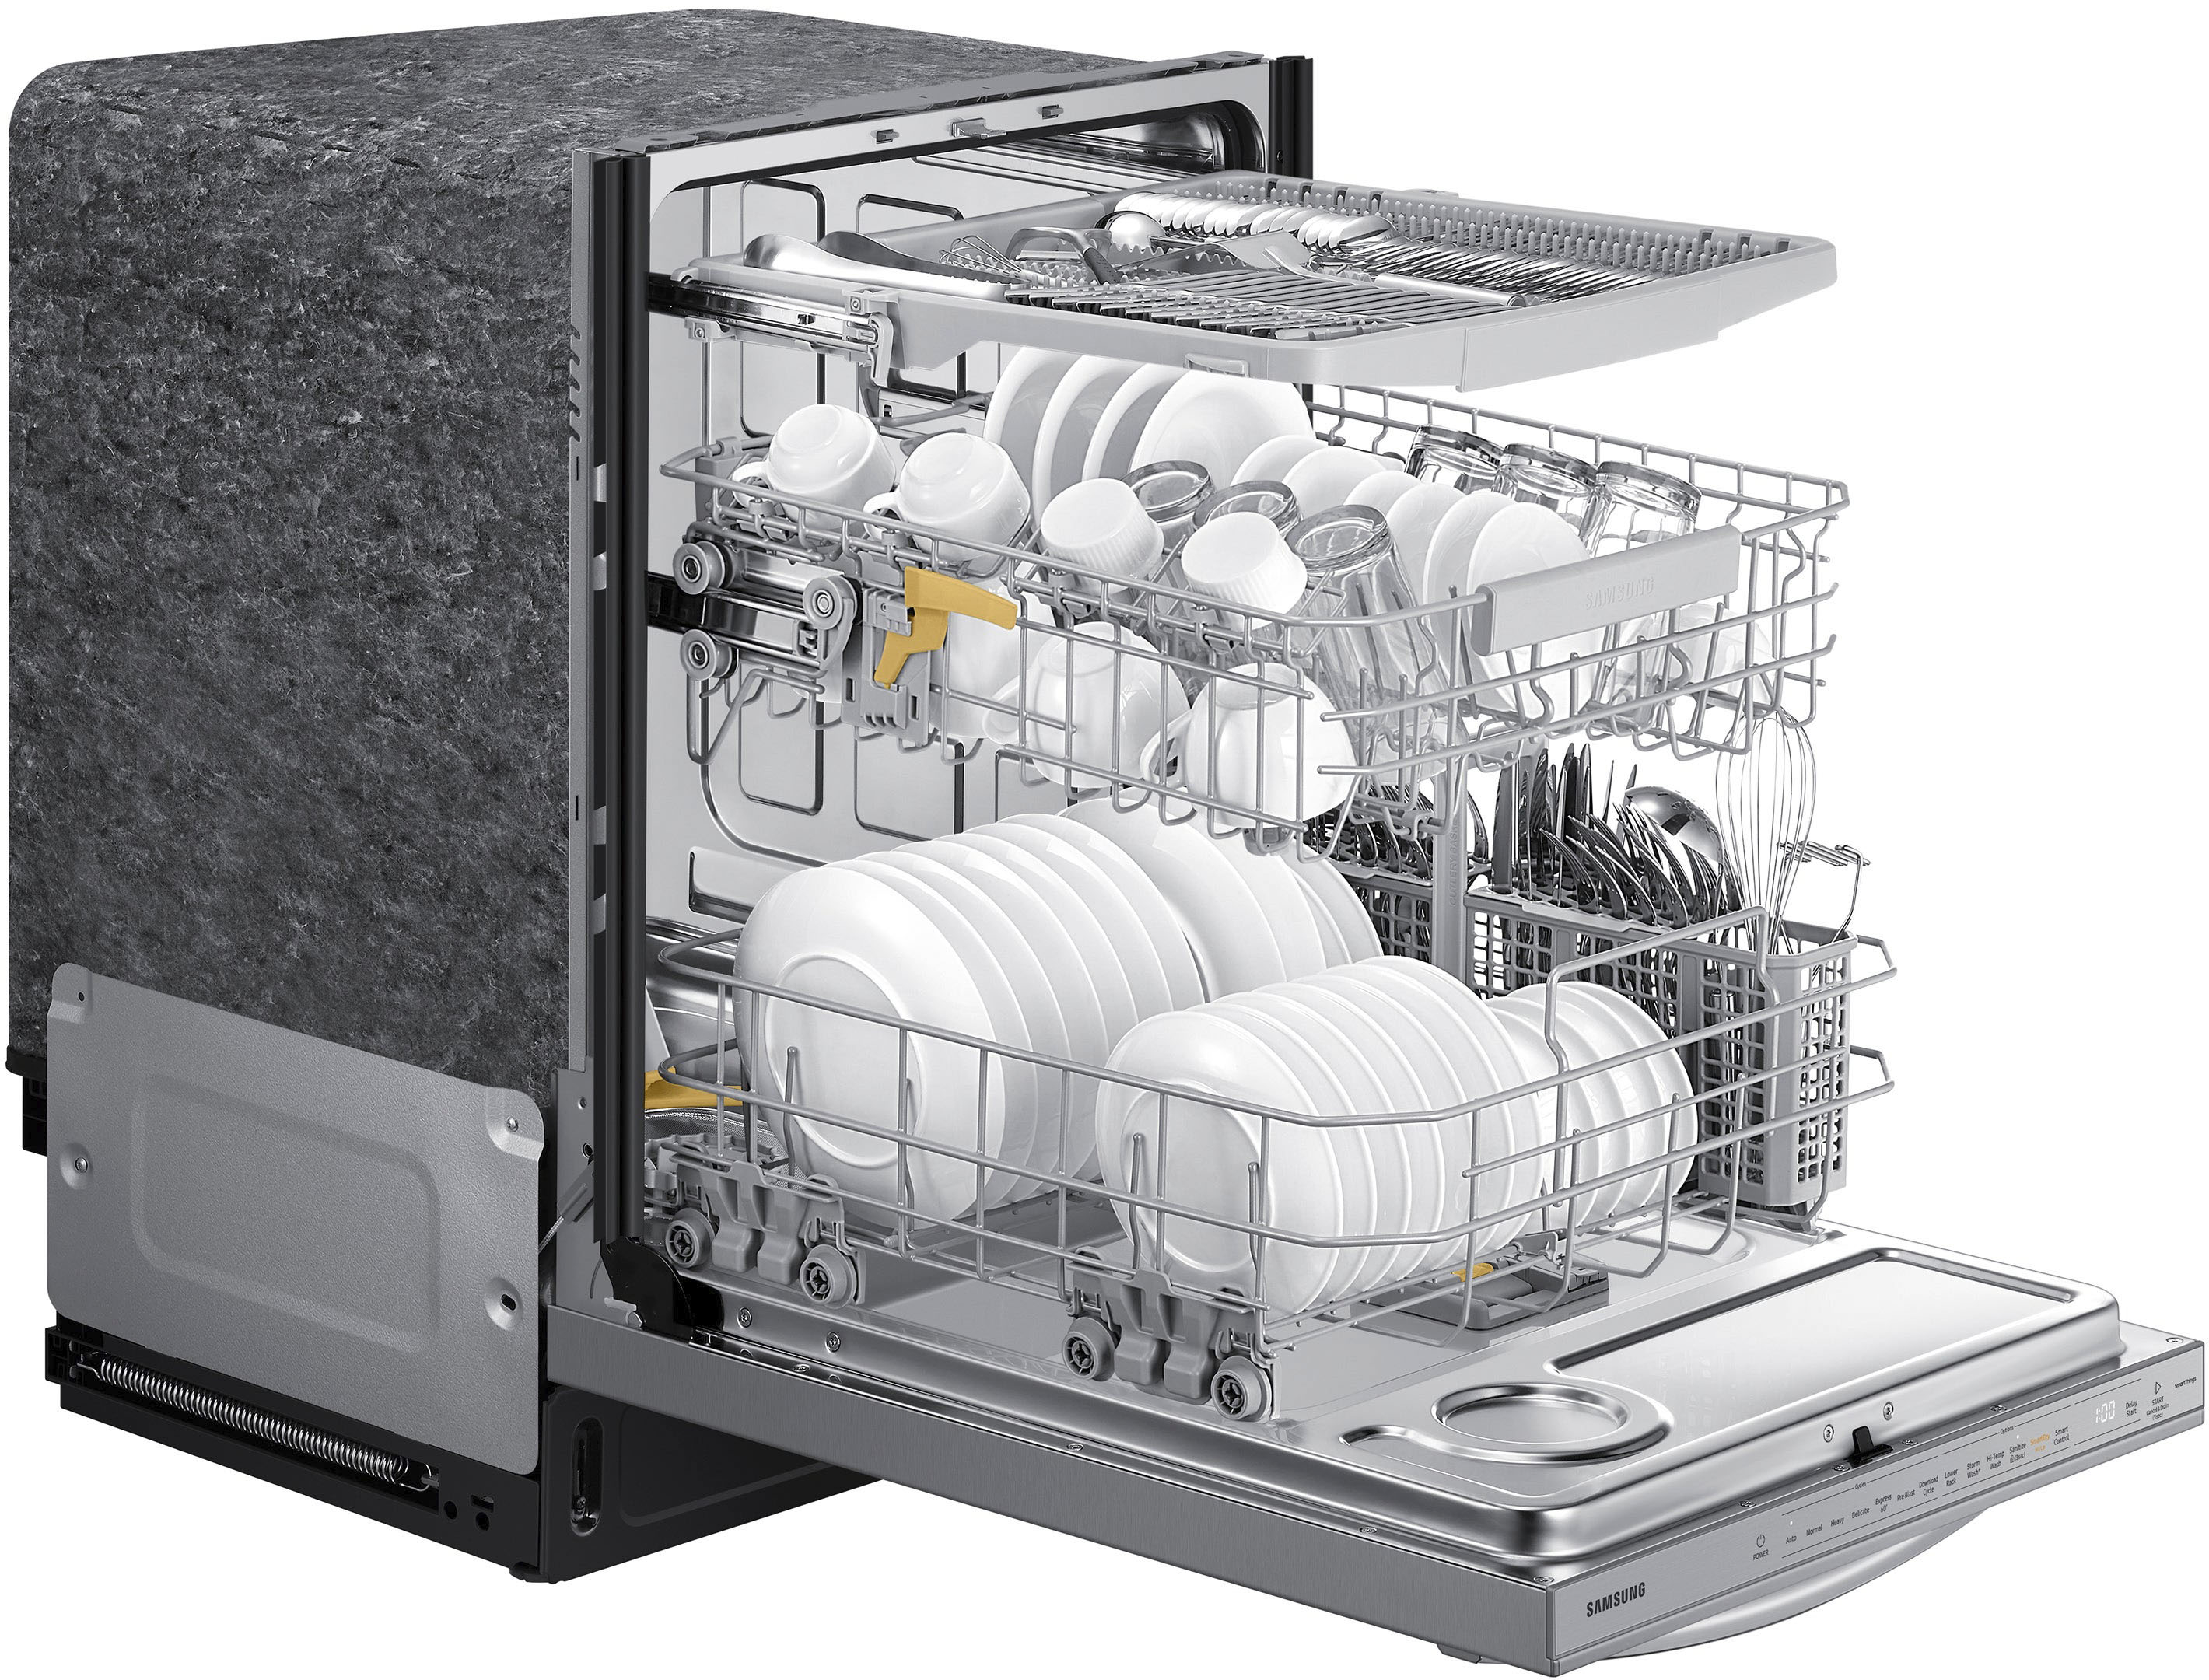 Samsung Smart 42dBA Dishwasher with StormWash+ and Smart Dry in Black Stainless Steel